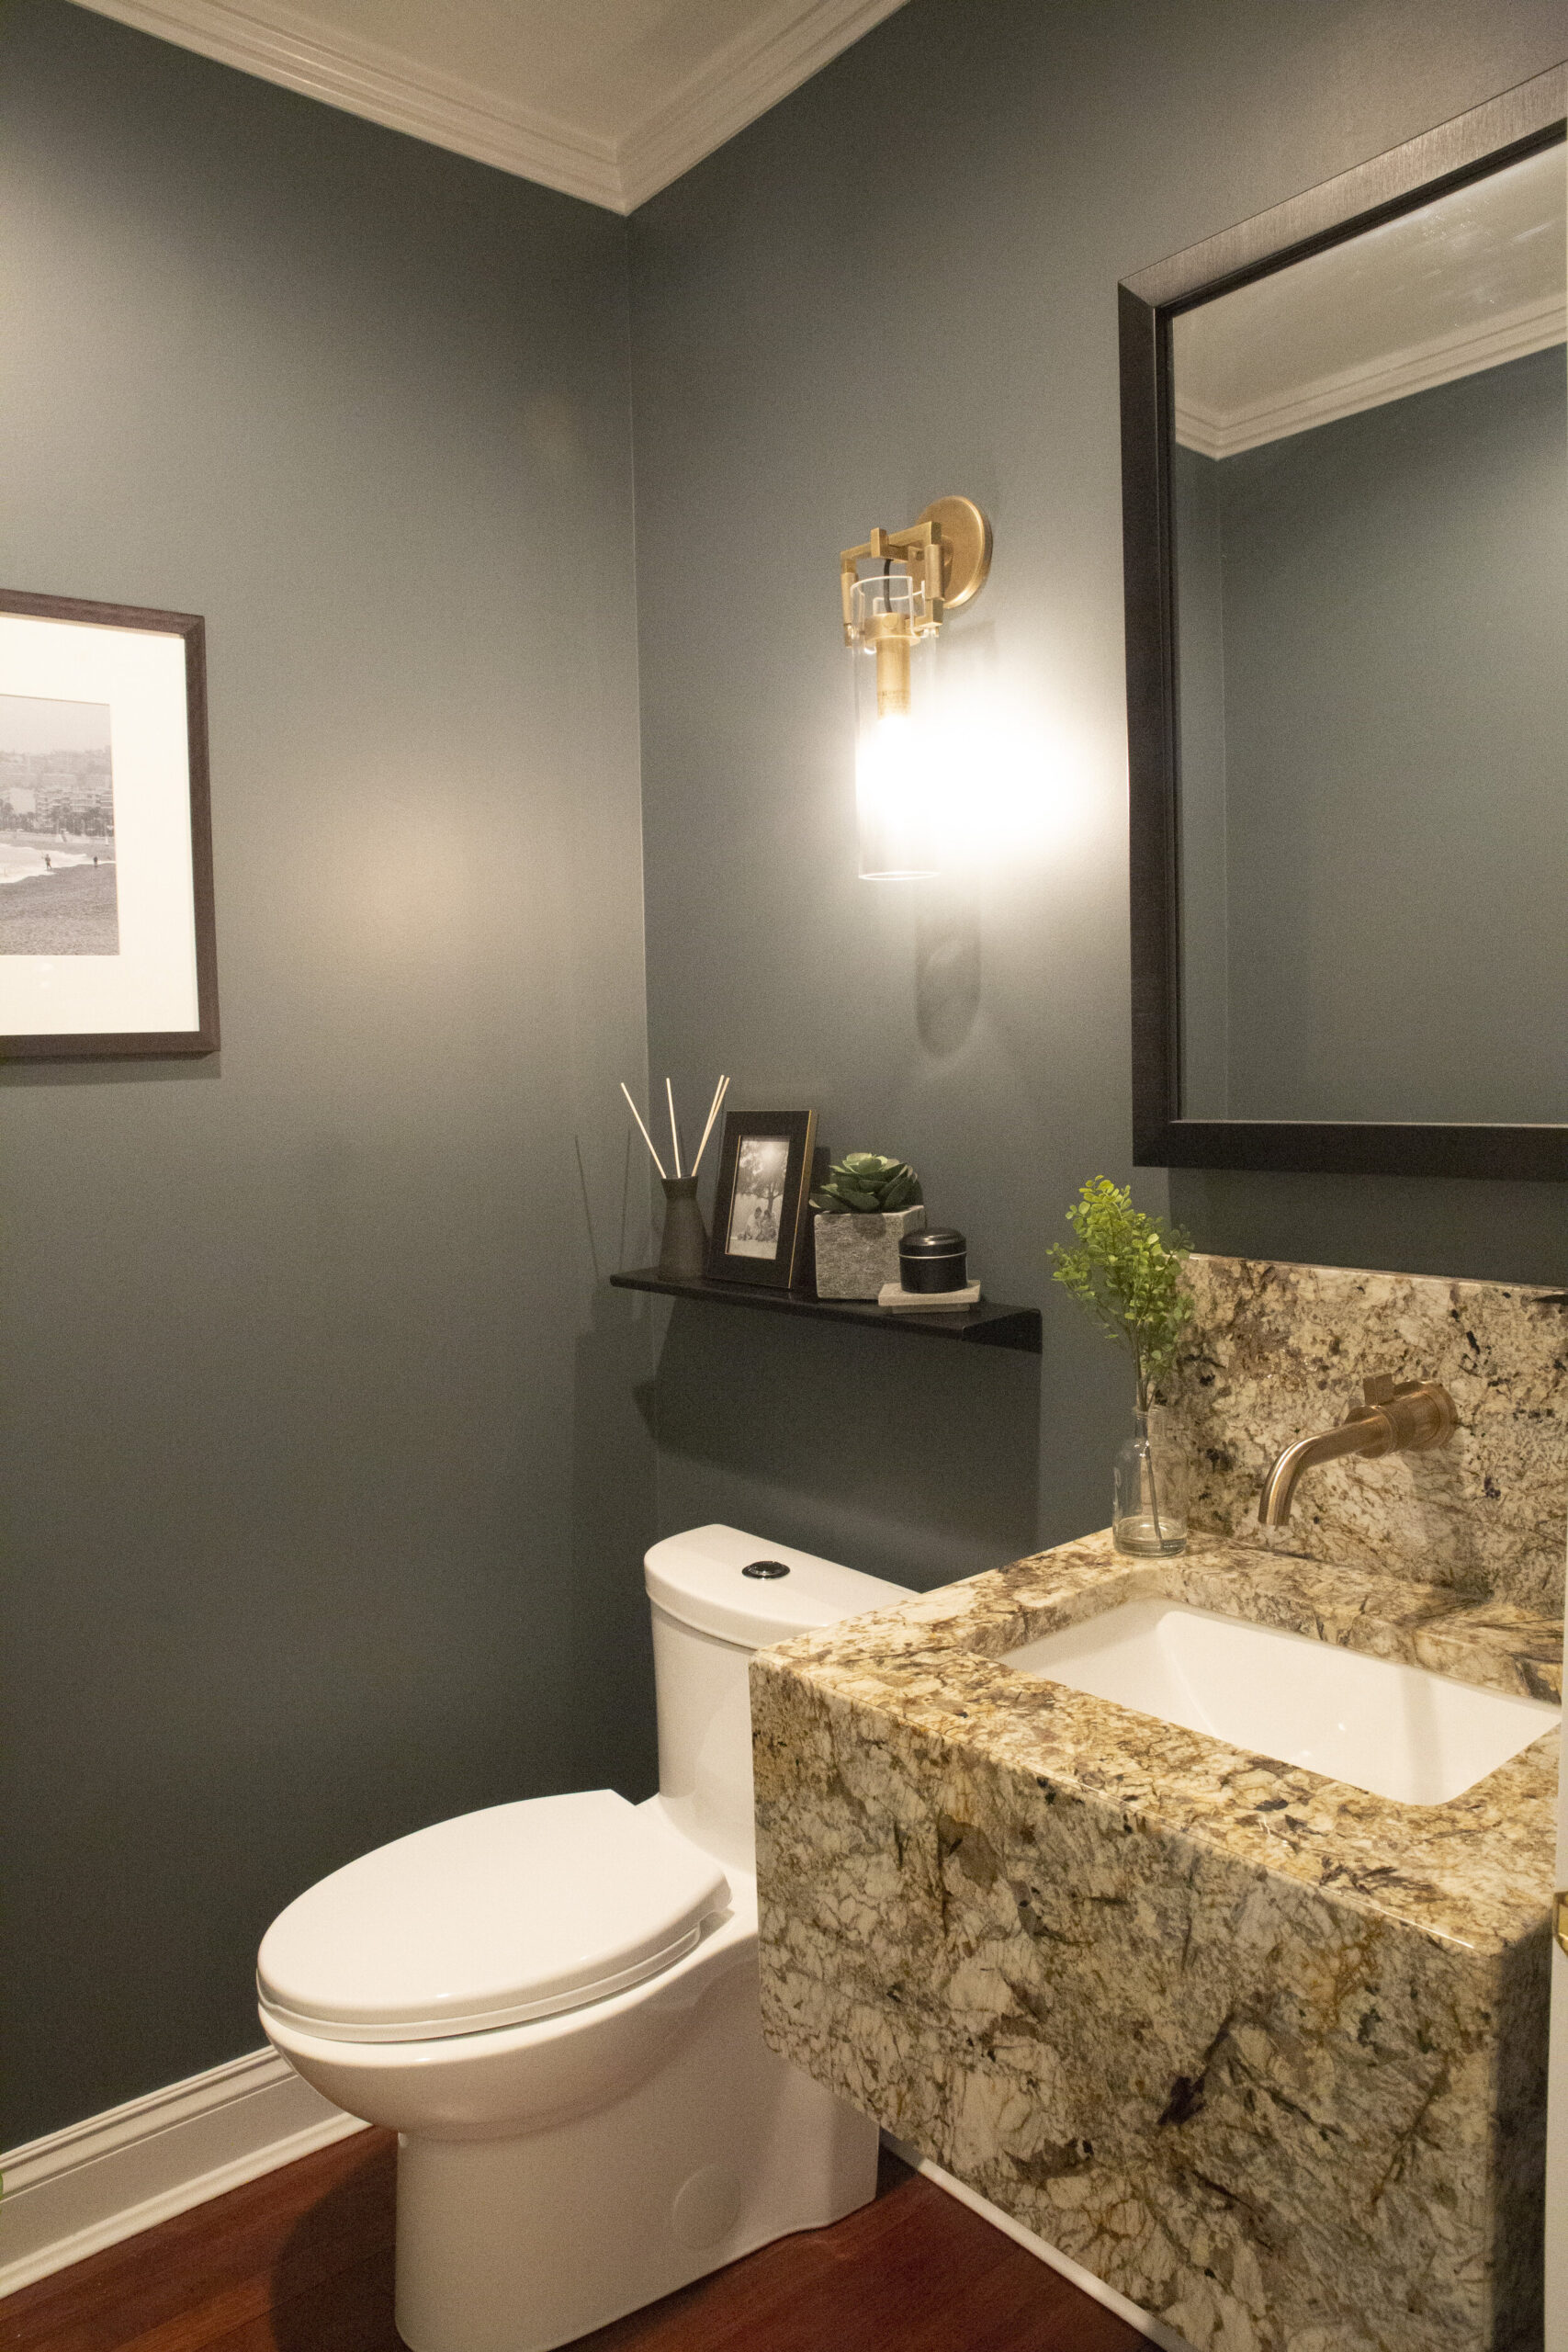 Customized powder room with granite countertop.